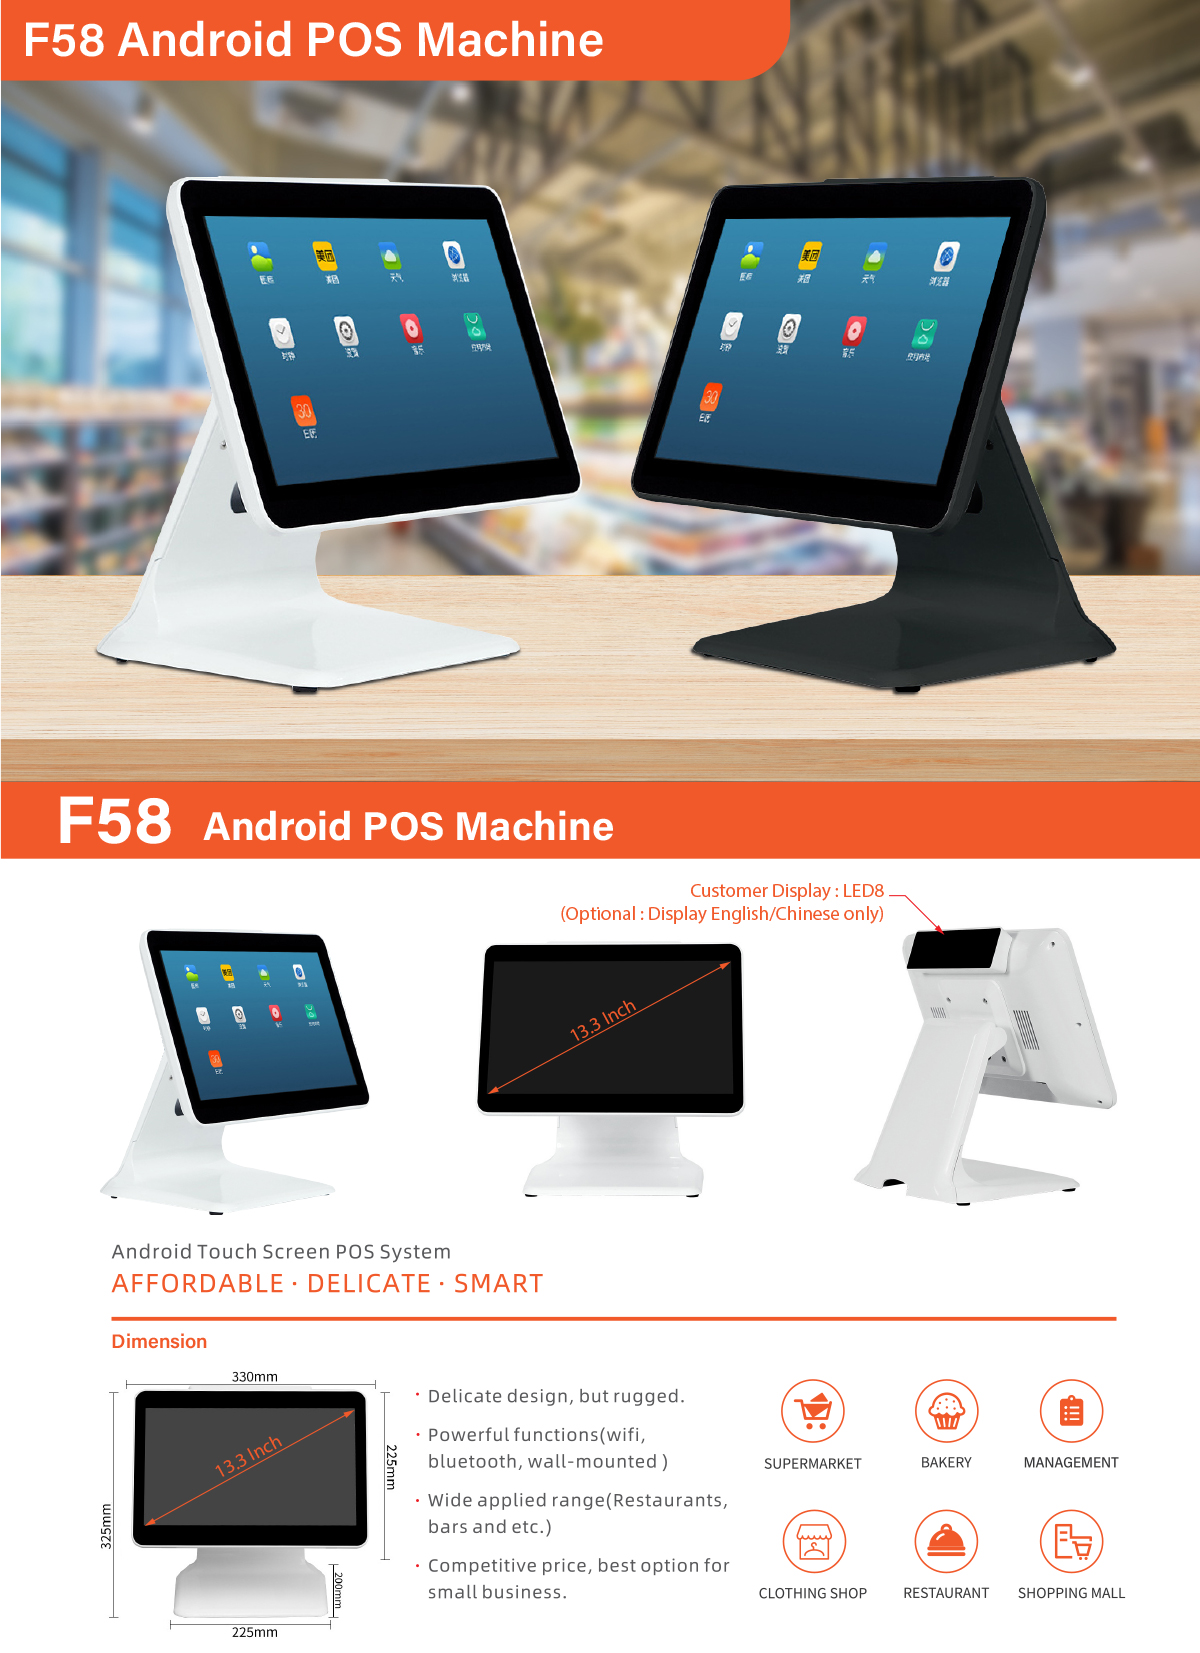 F-58 Android POS Machine